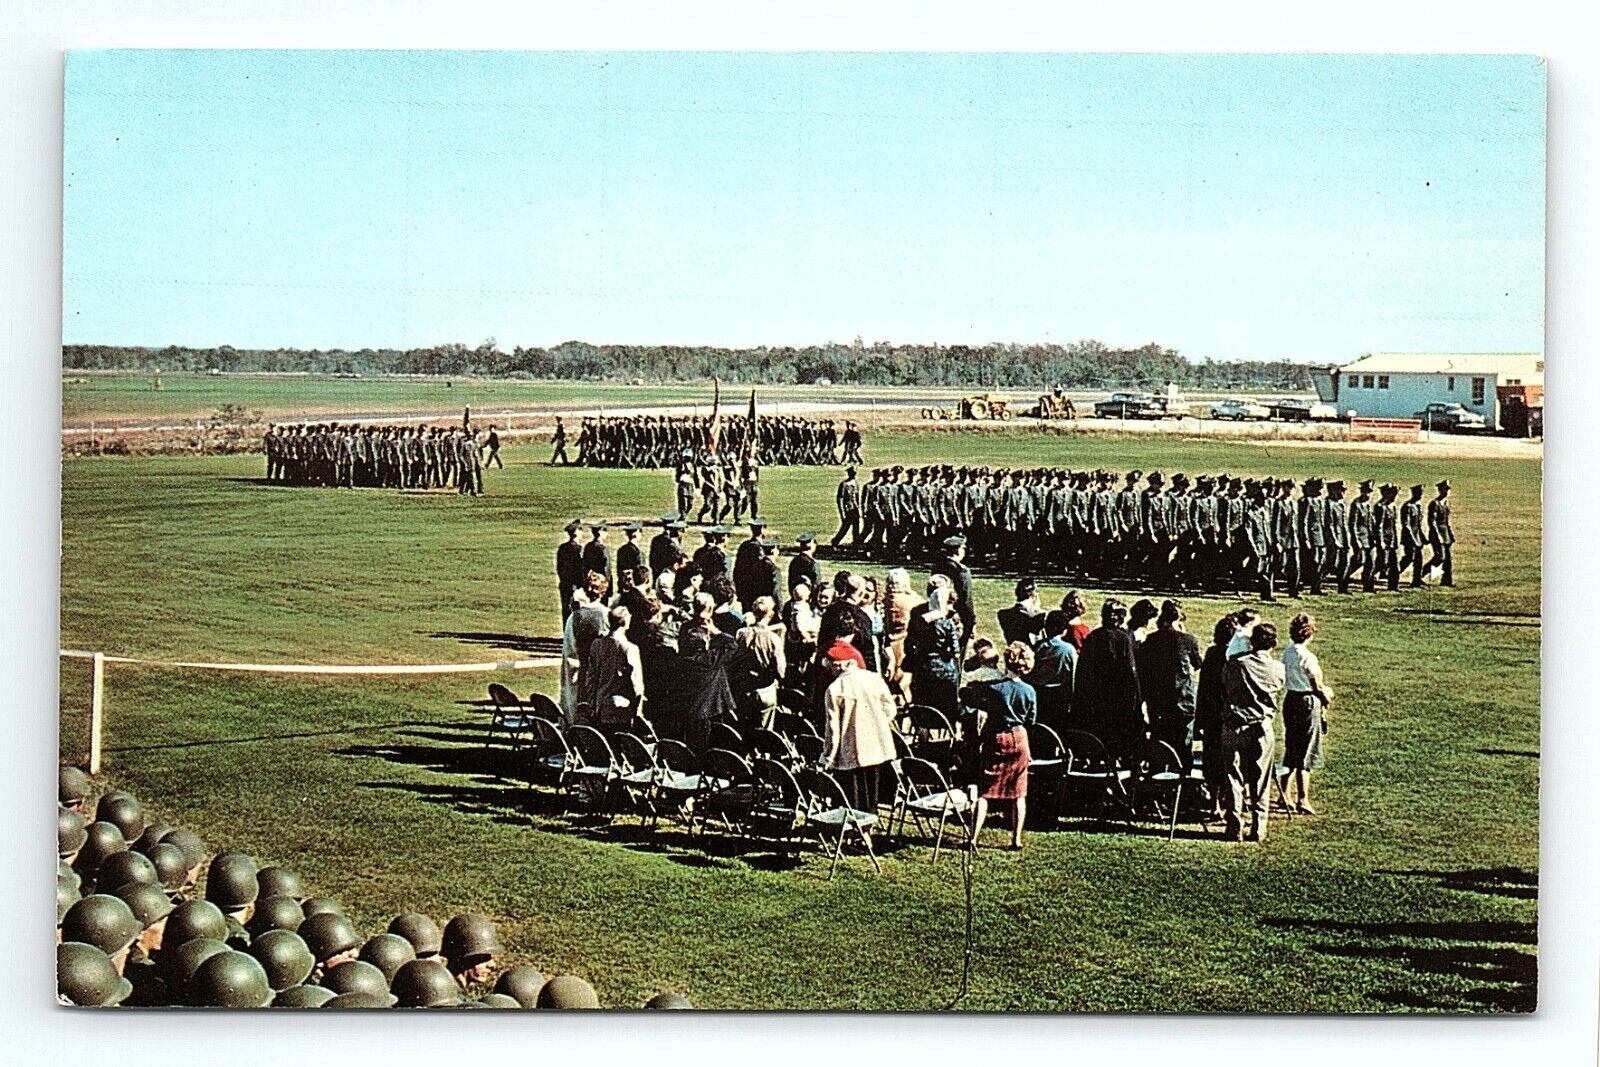 Ceremony End Training Cycle Fort Dix Soldiers Troops New Jersey NJ VTG Postcard